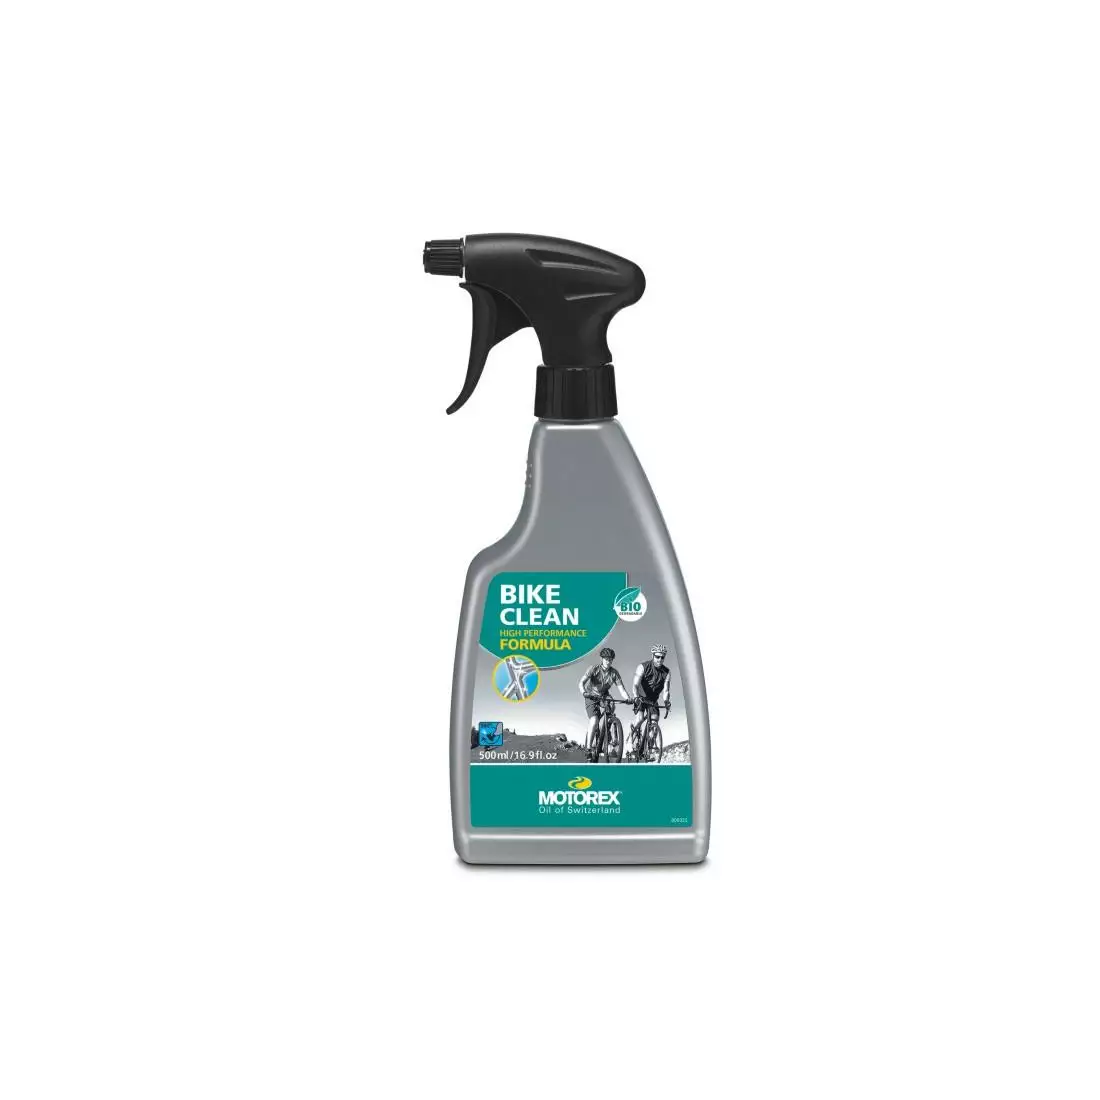 MOTOREX BIKE CLEAN preparation for cleaning all types of dirt, atomizer 500 ml